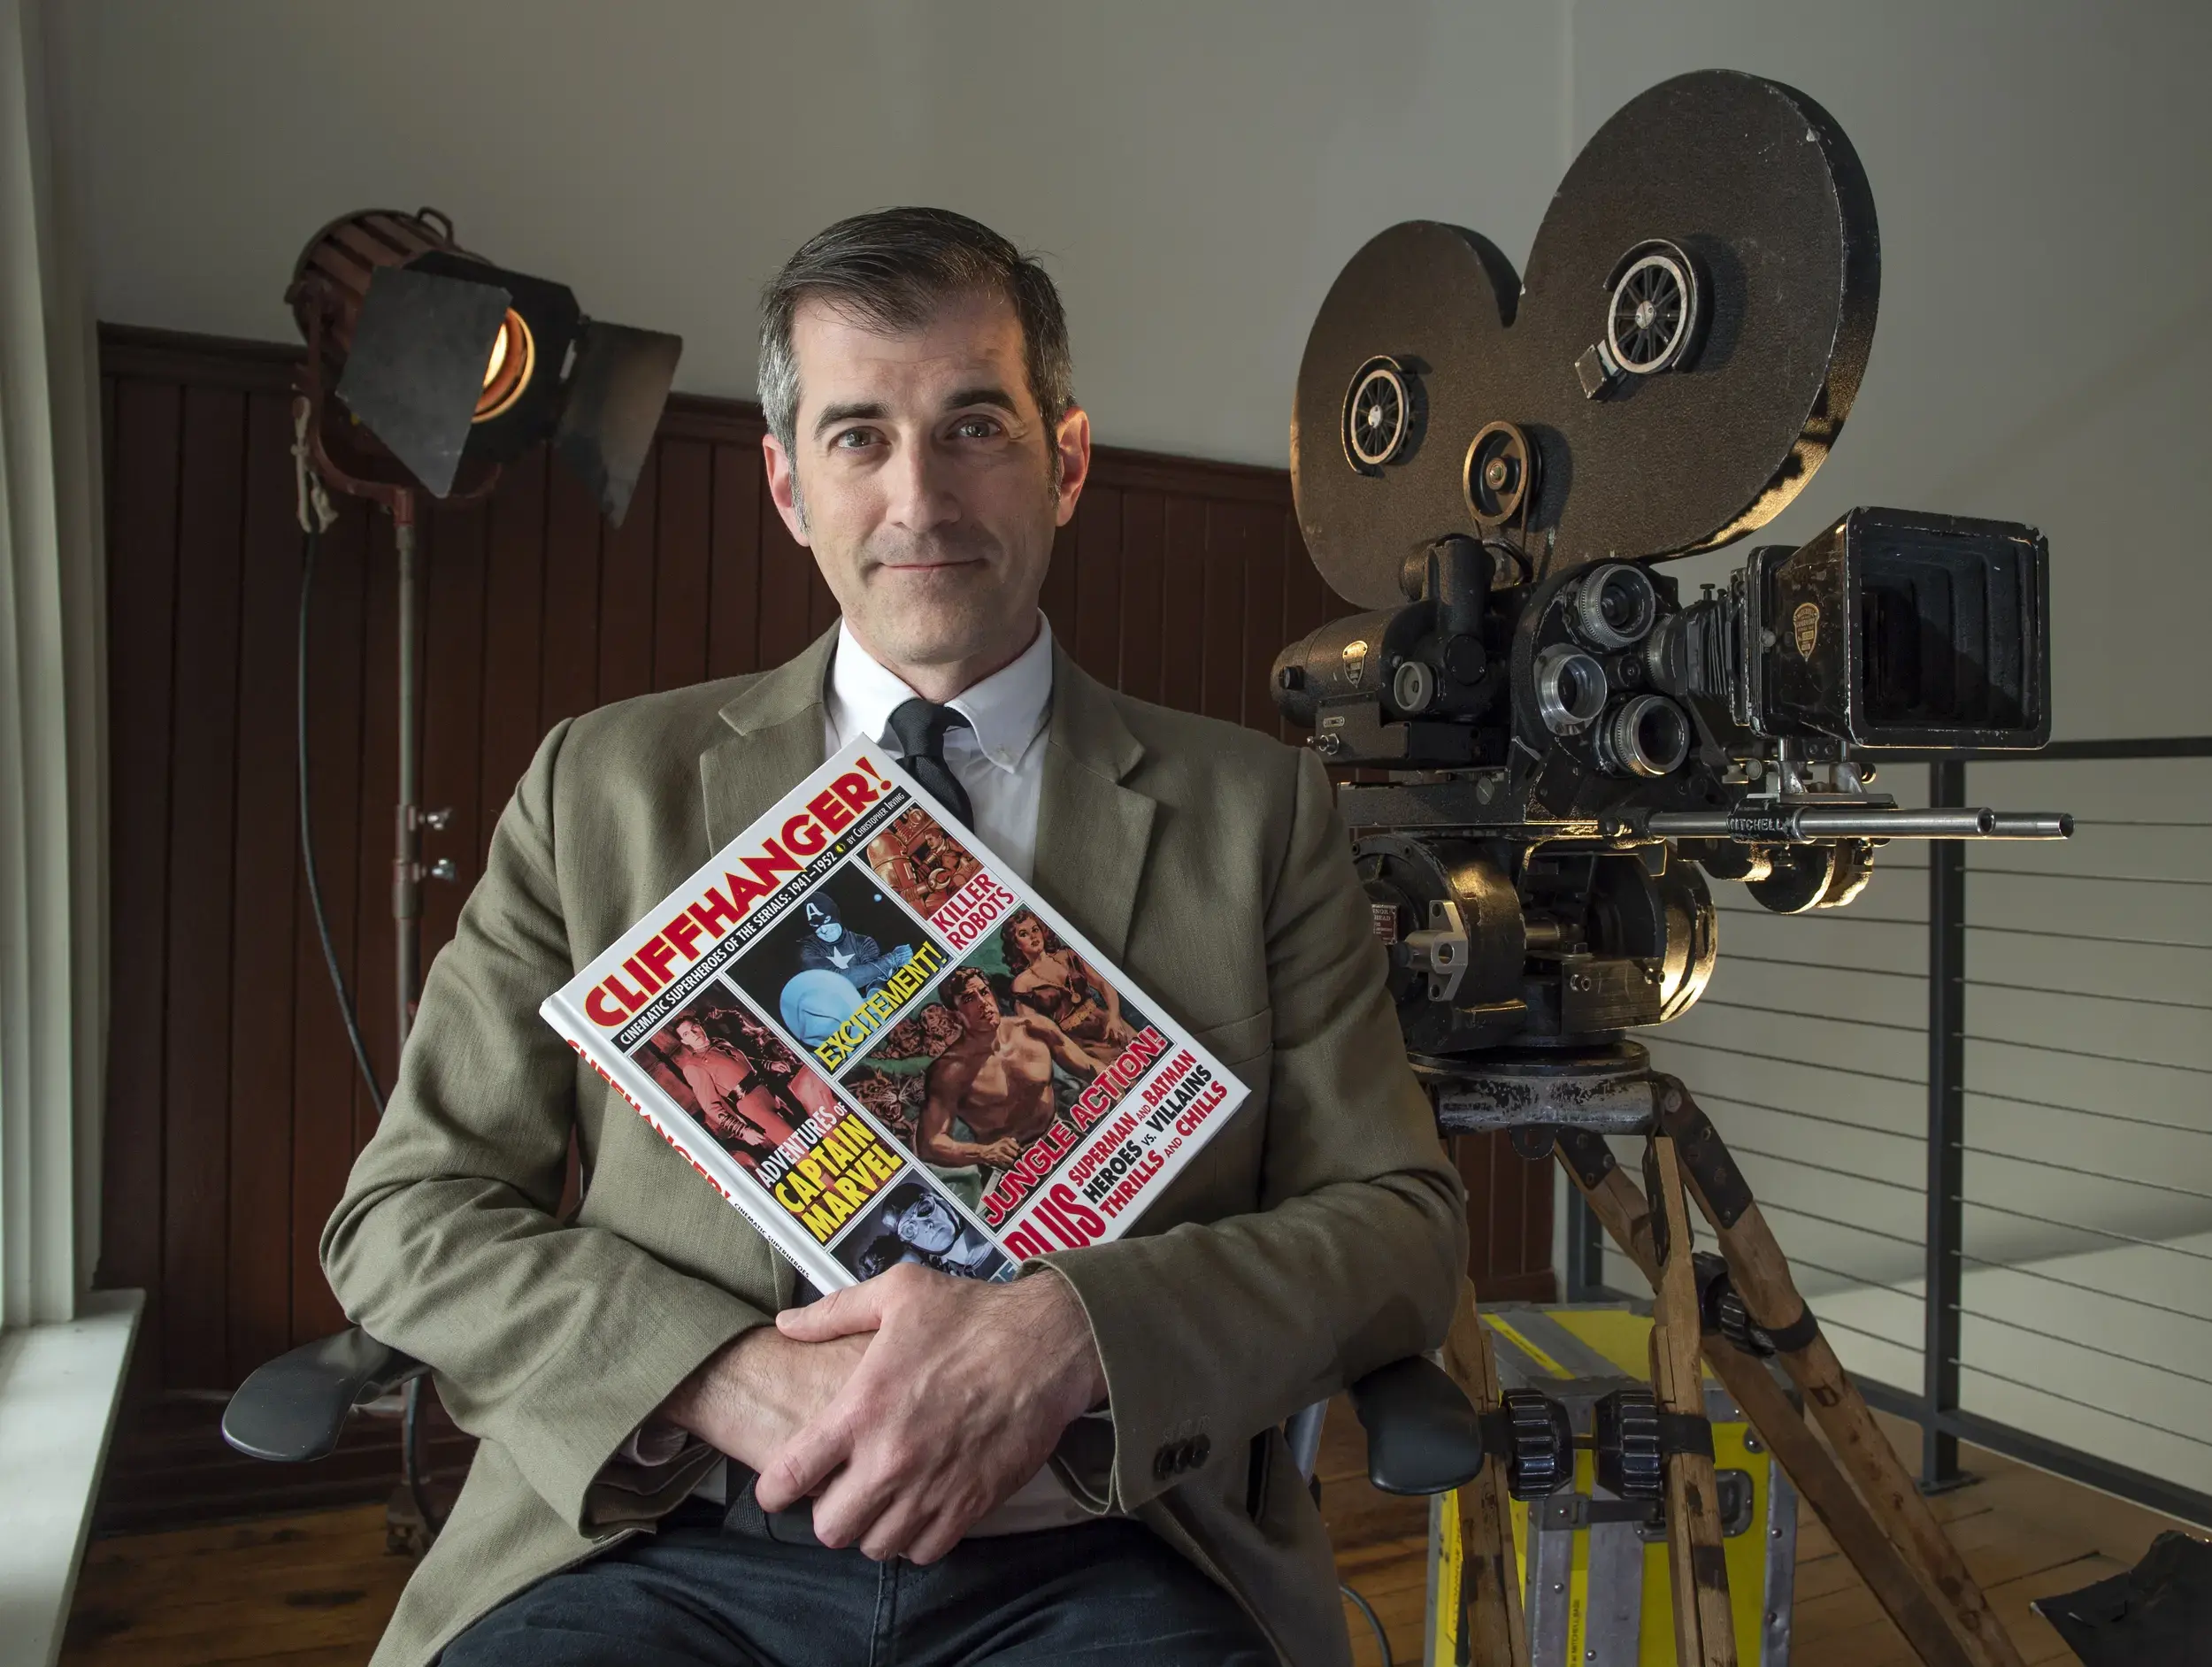 A man sitting in front of a film camera holding a book that says 